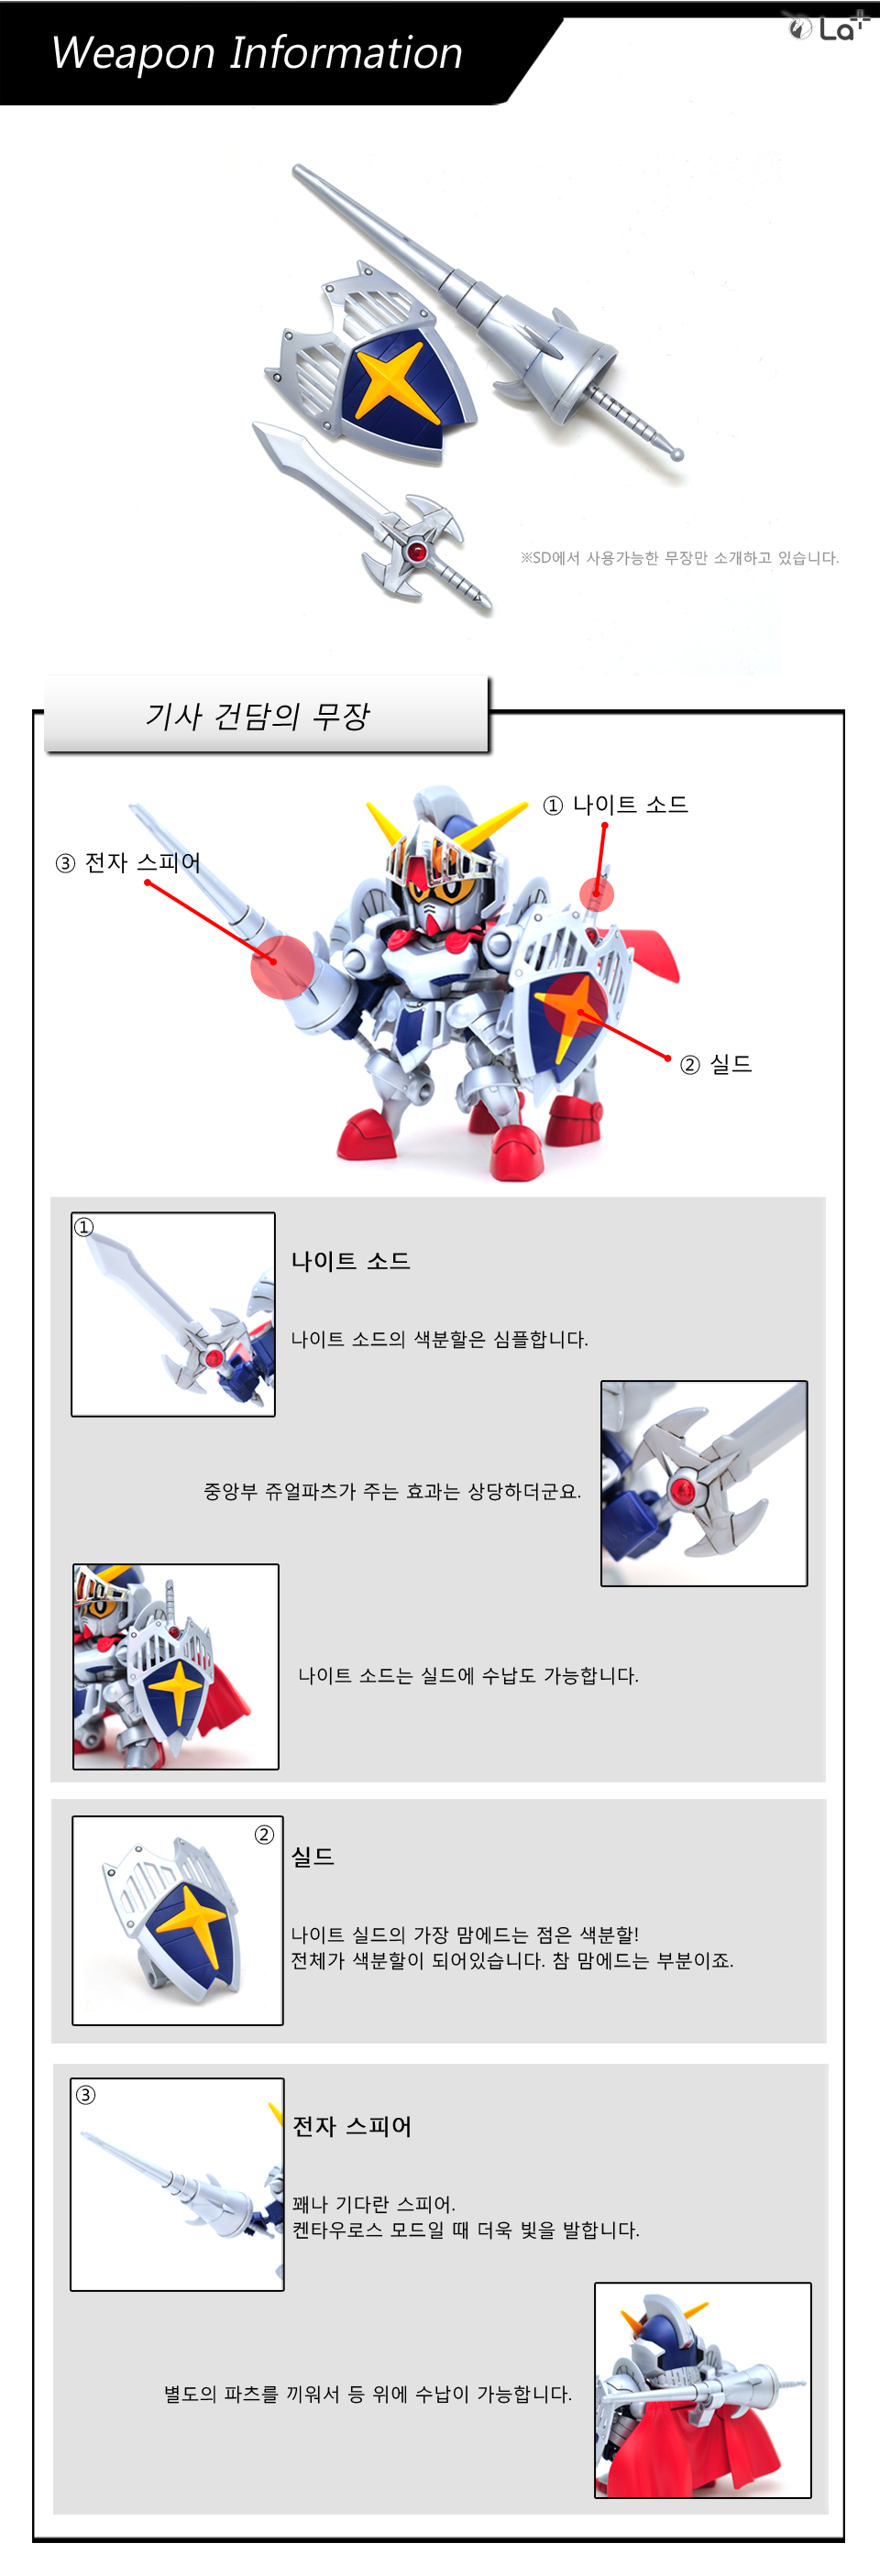 sd370_part2_weapon_001_01.png